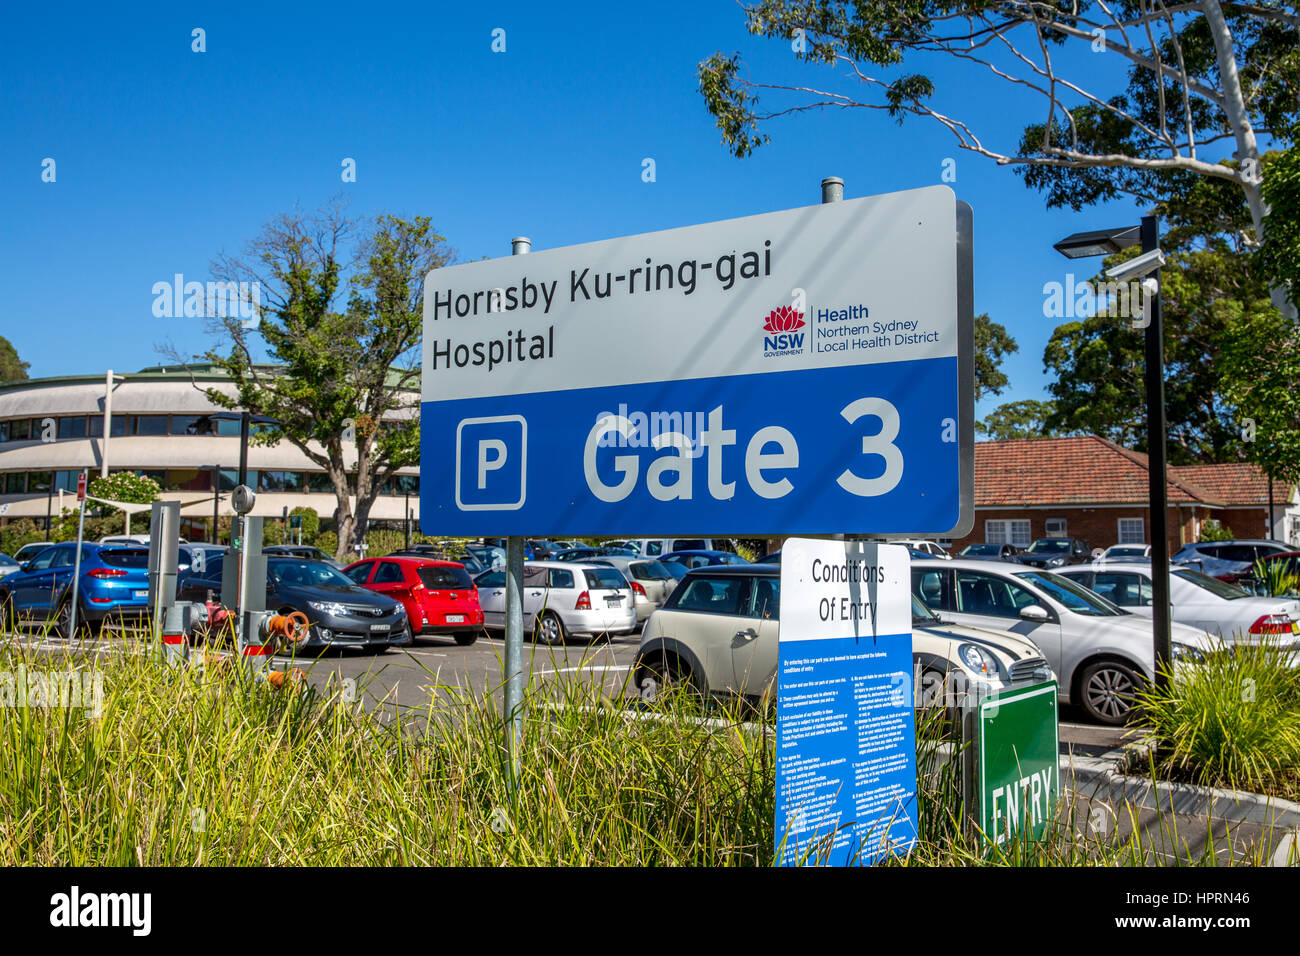 Hornsby Ku-ring-gai public hospital in north west Sydney,New south wales,australia Stock Photo